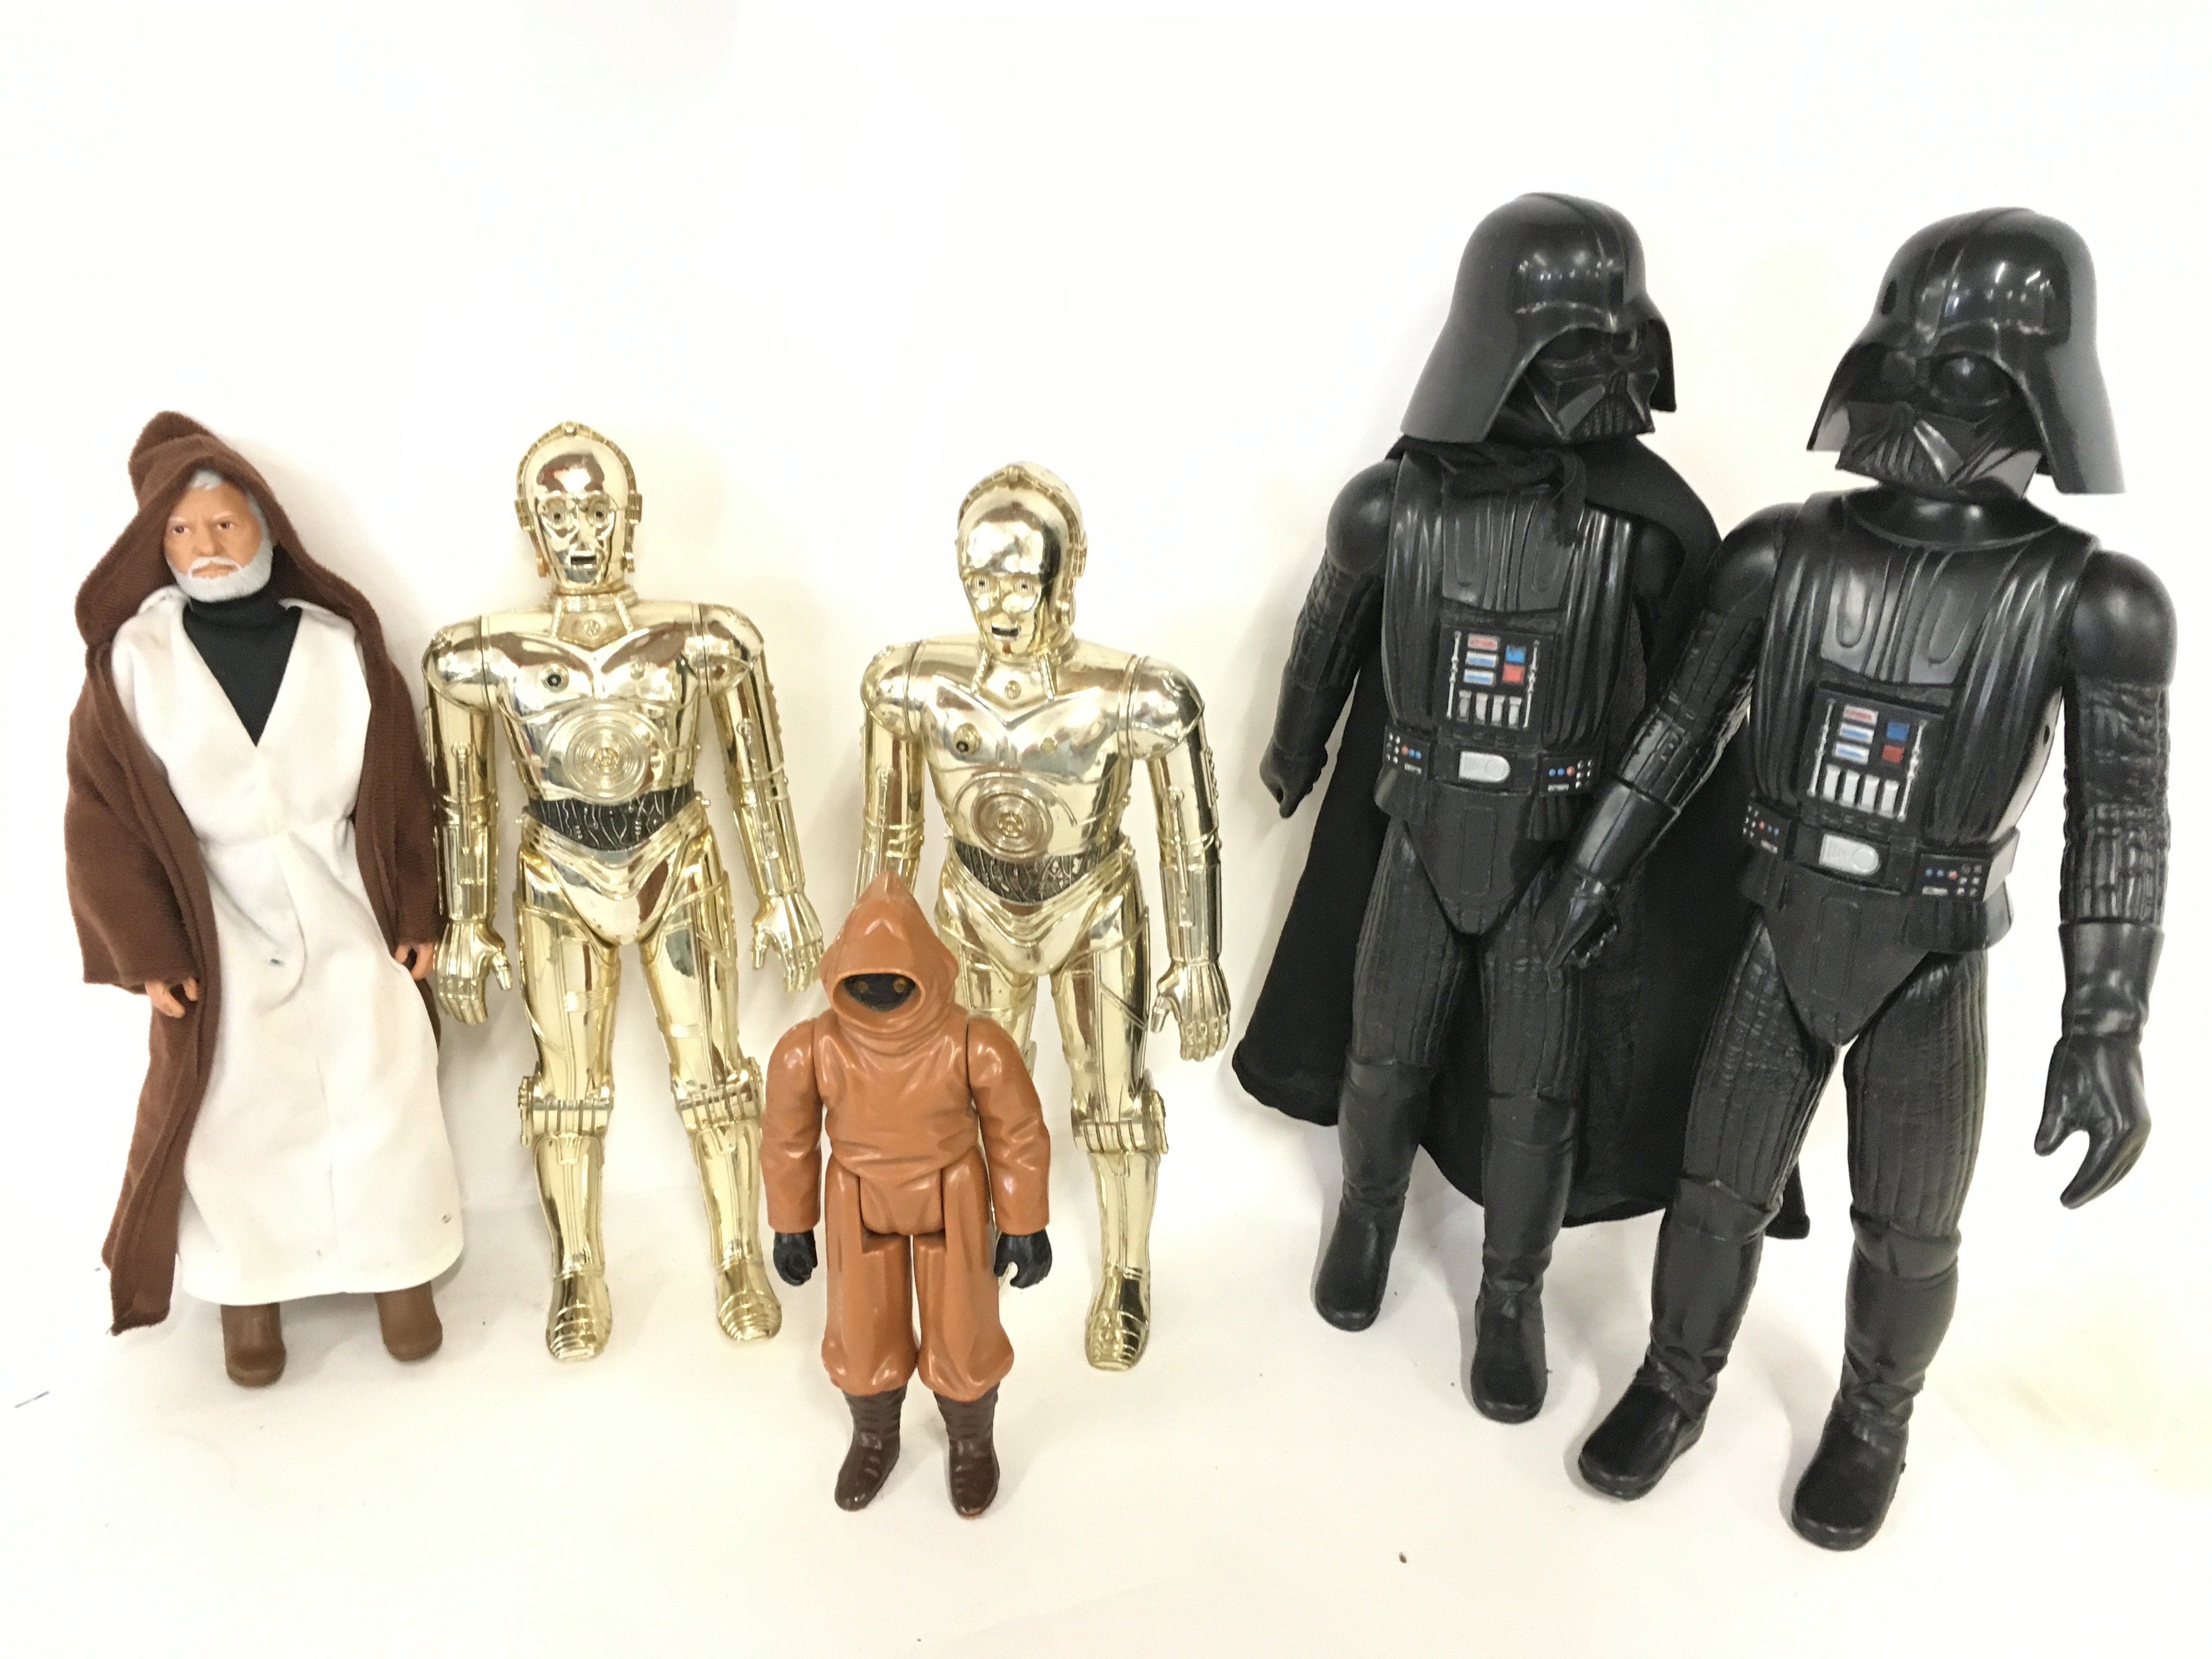 A Collection of Vintage 12 inch Star Wars Figures.